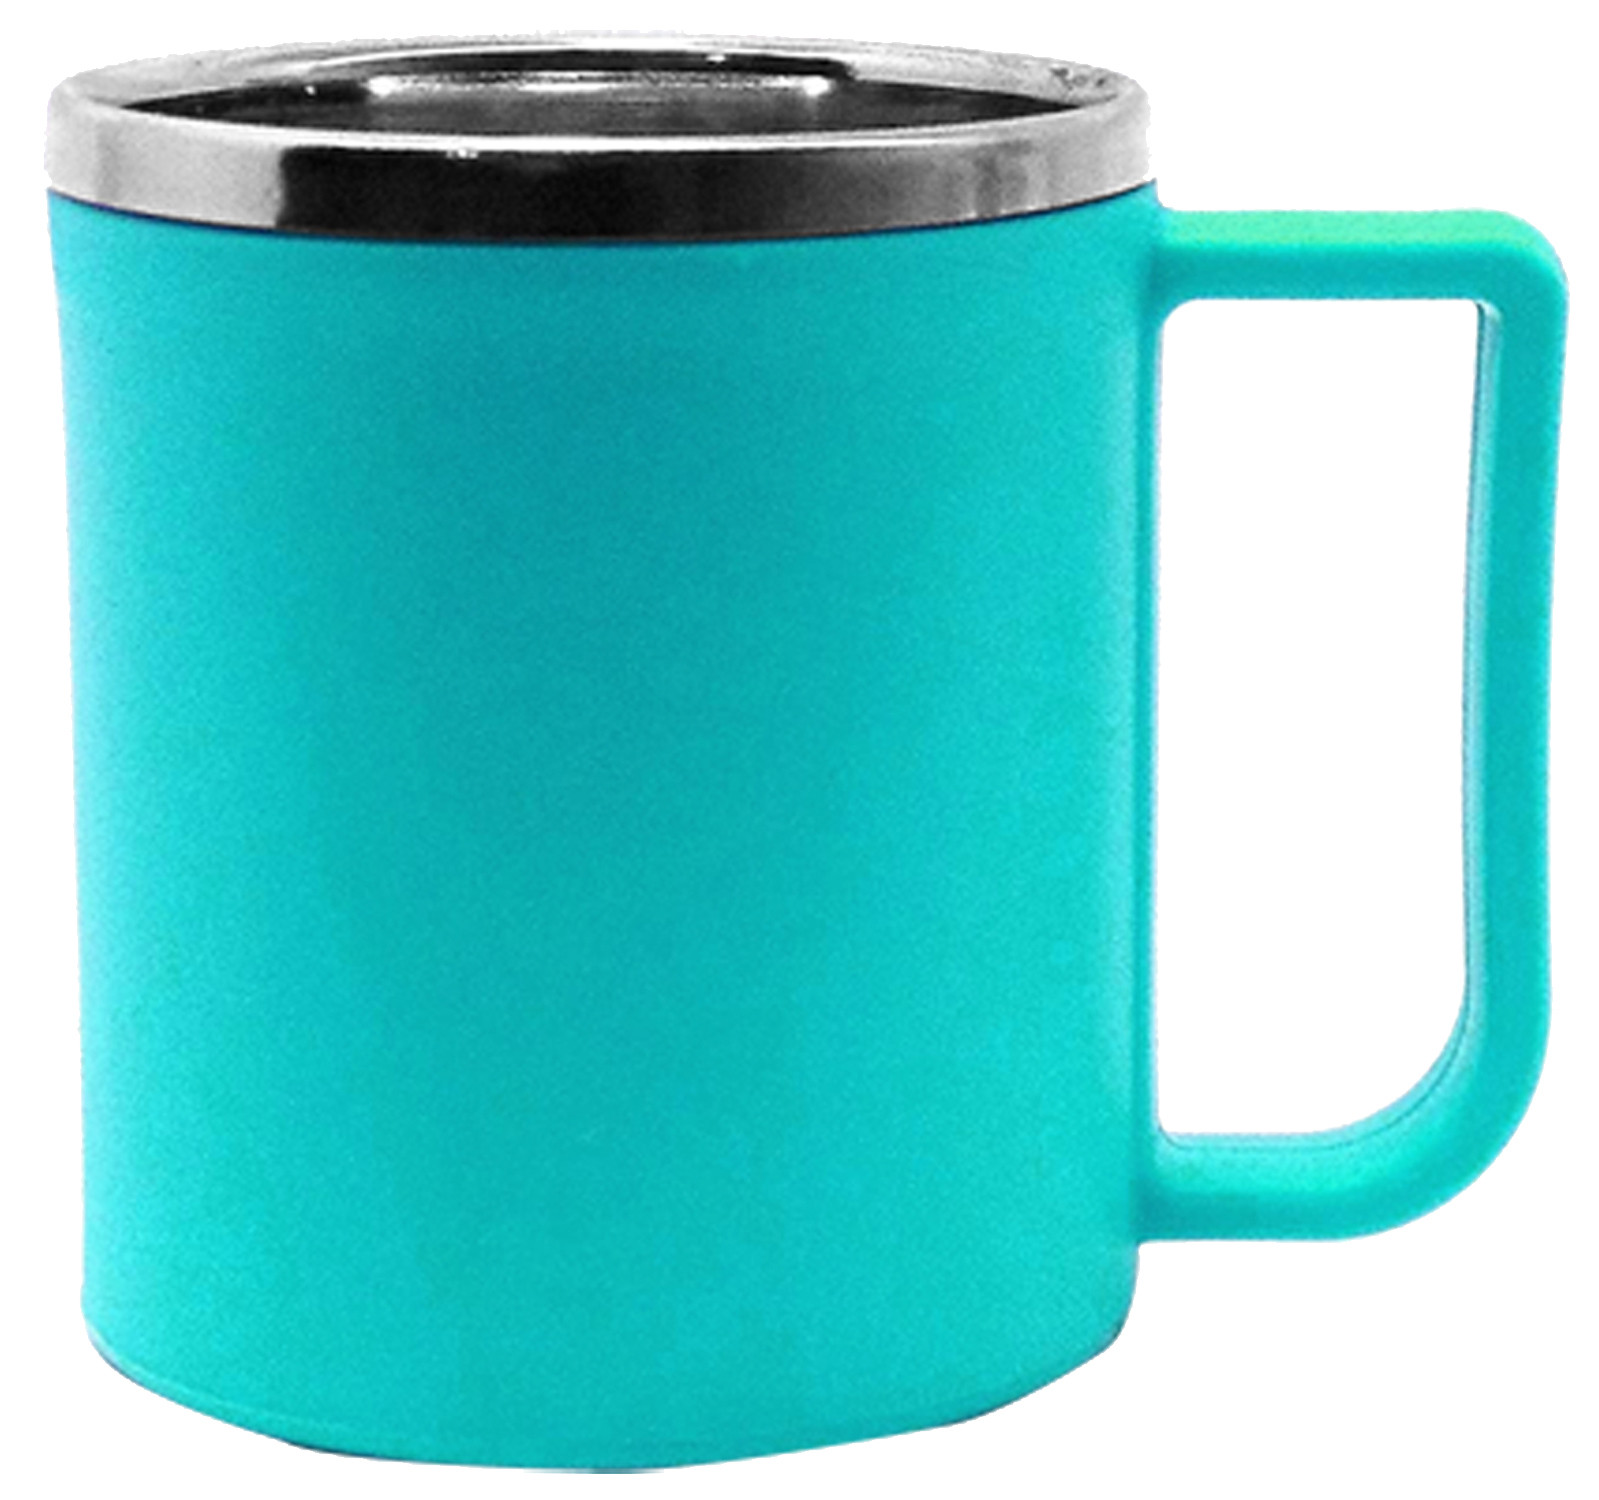 Kuber Industries Plastic Steel Cups for Coffee Tea Cocoa, Camping Mugs with Handle, Portable & Easy Clean (Green)